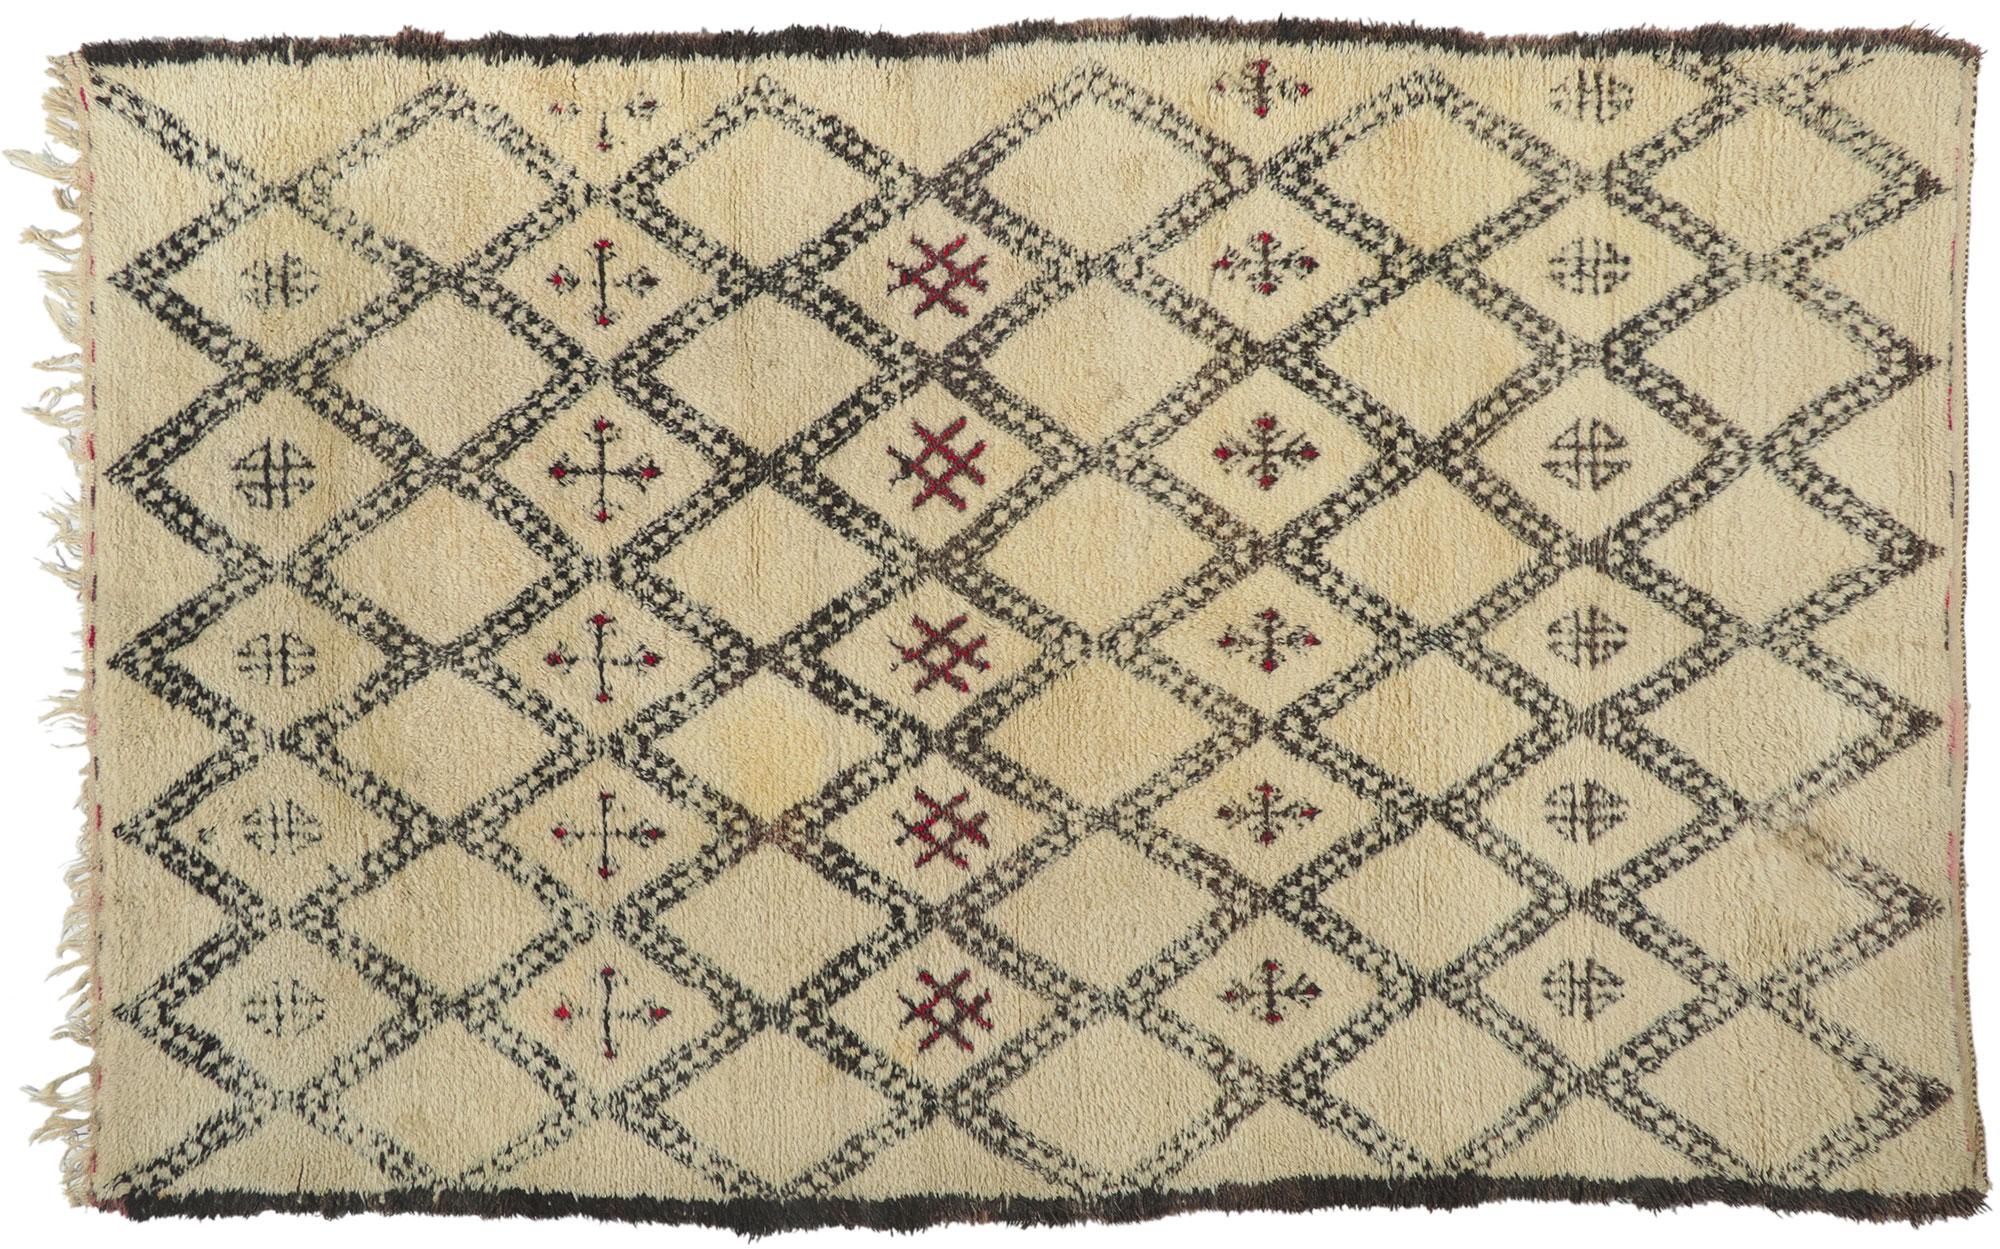 78413 vintage Moroccan Beni Ourain rug, 06'04 x 10'00.
With its simplicity, plush pile, incredible detail and texture, this hand knotted wool vintage Beni Ourain Moroccan rug is a captivating vision of woven beauty. The eye-catching diamond trellis